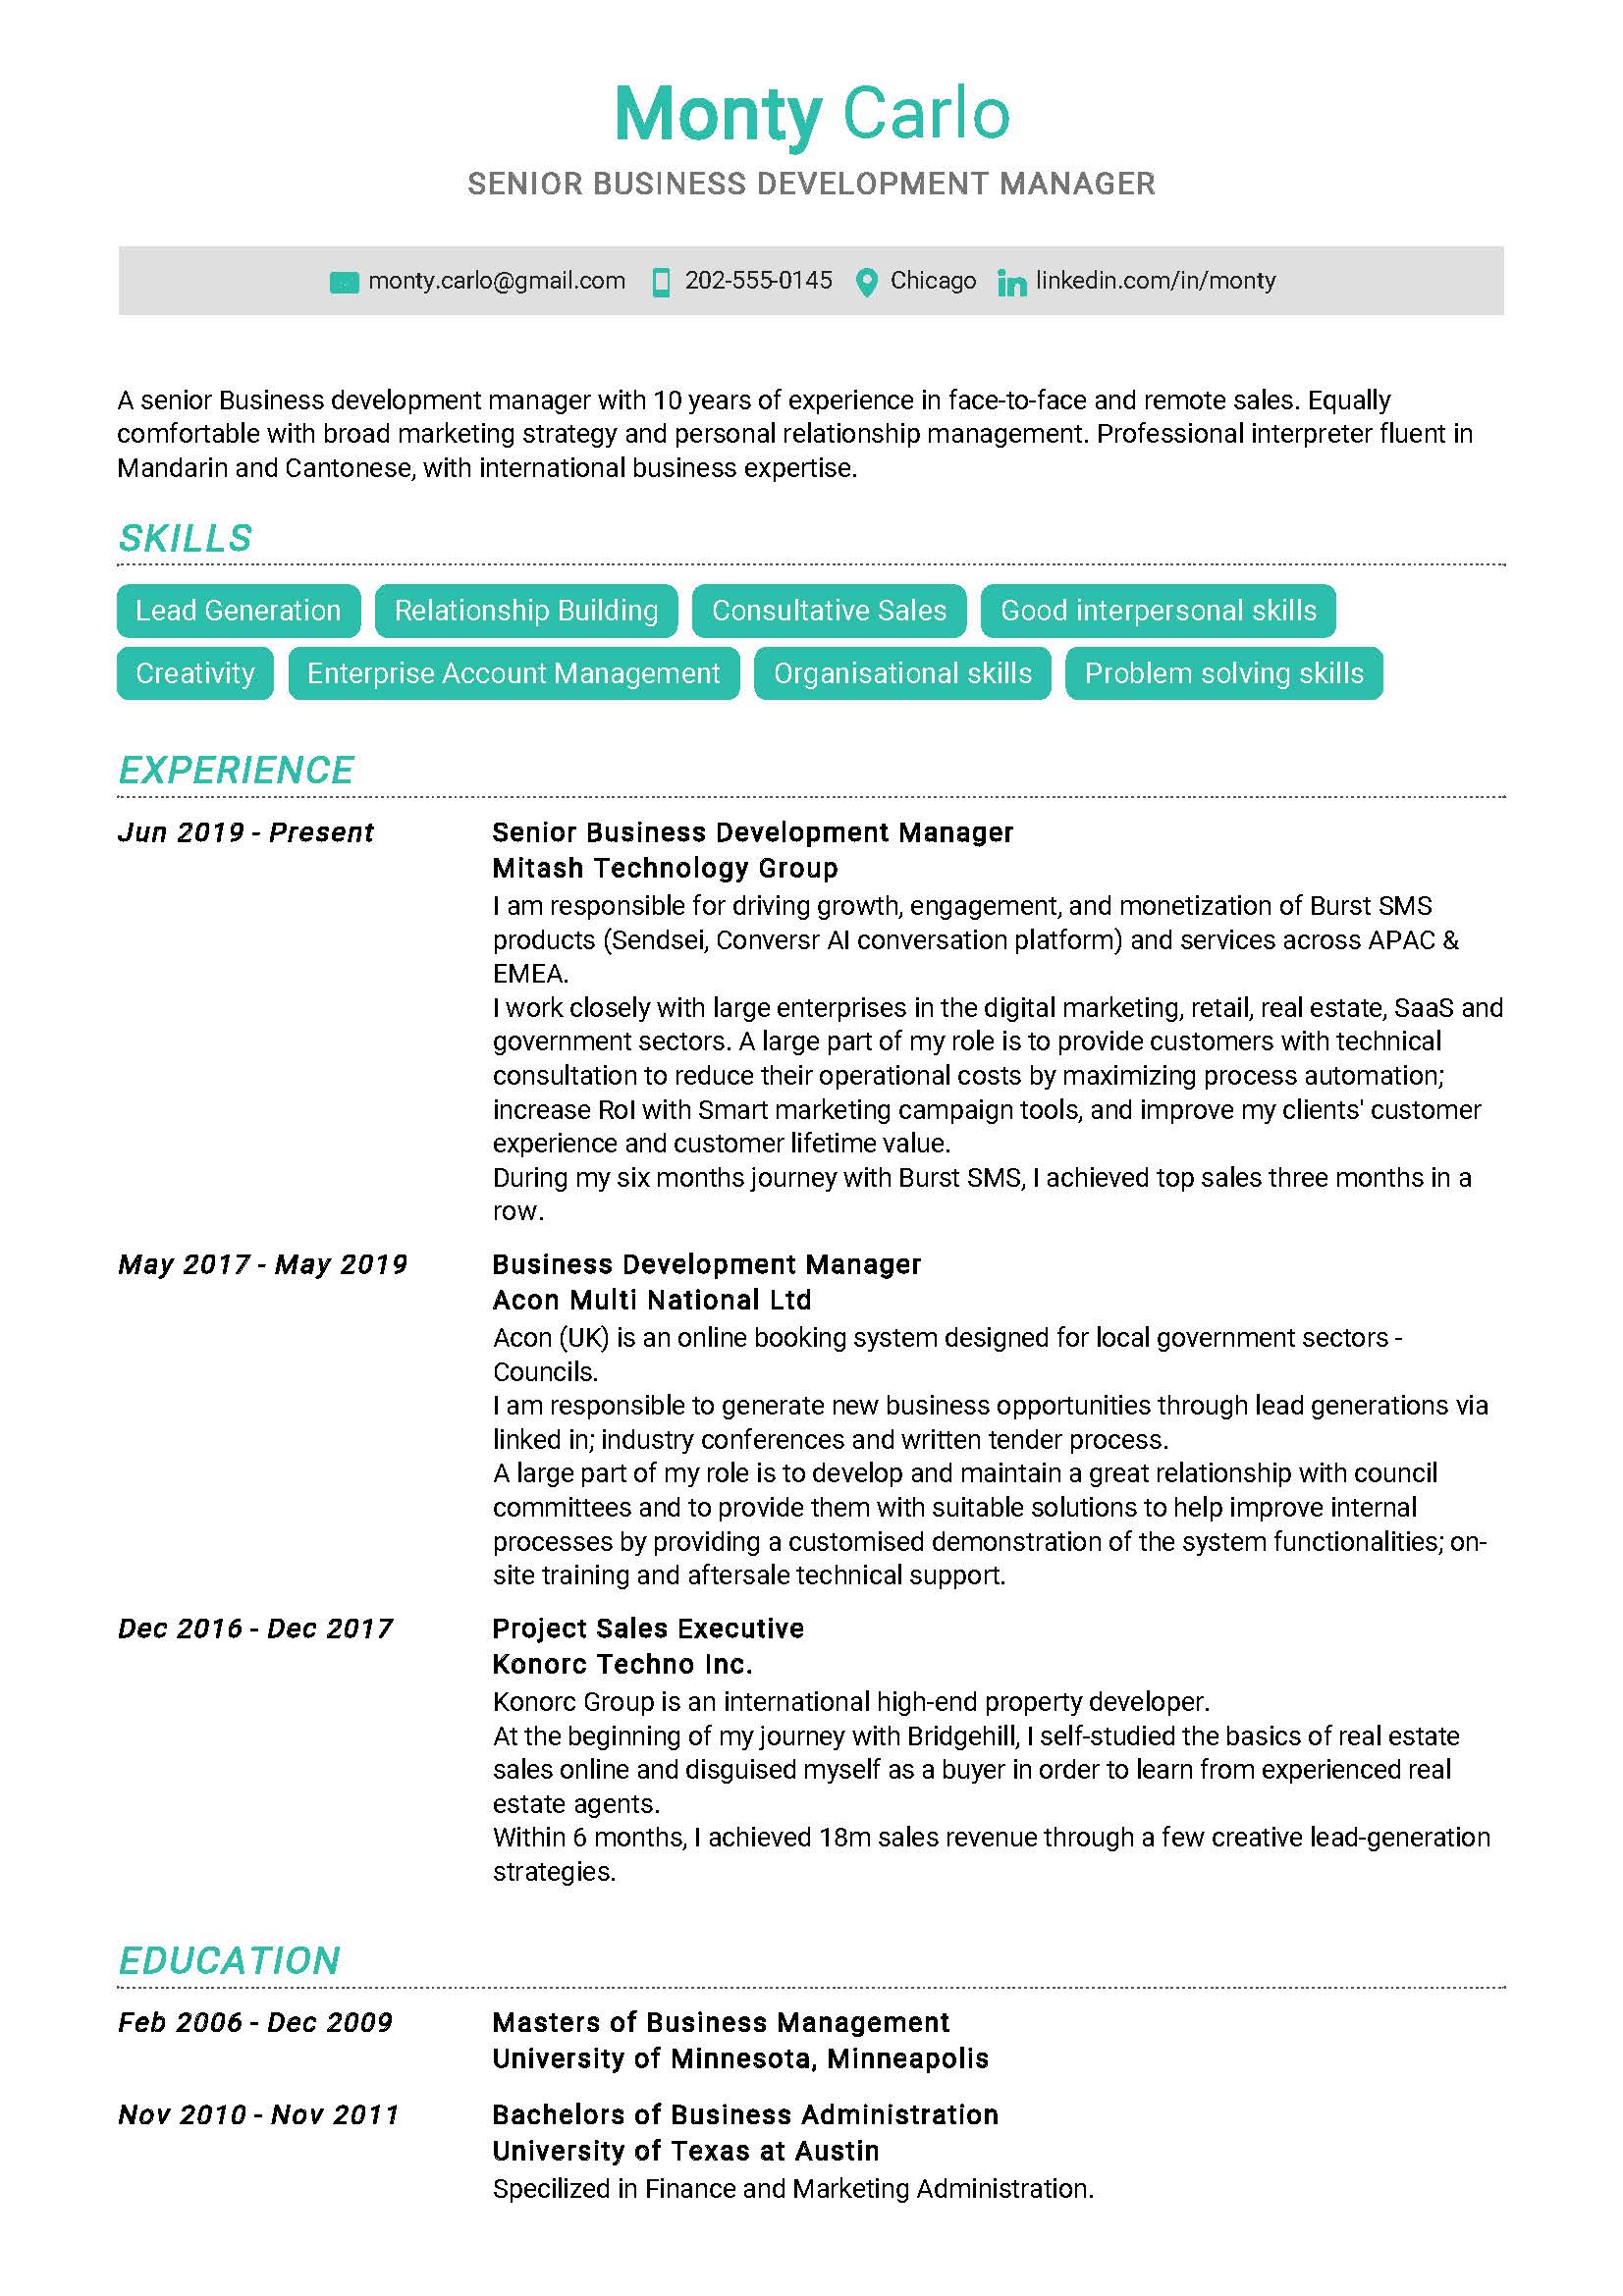 Senior Business Development Manager Resume Example in Year 2020